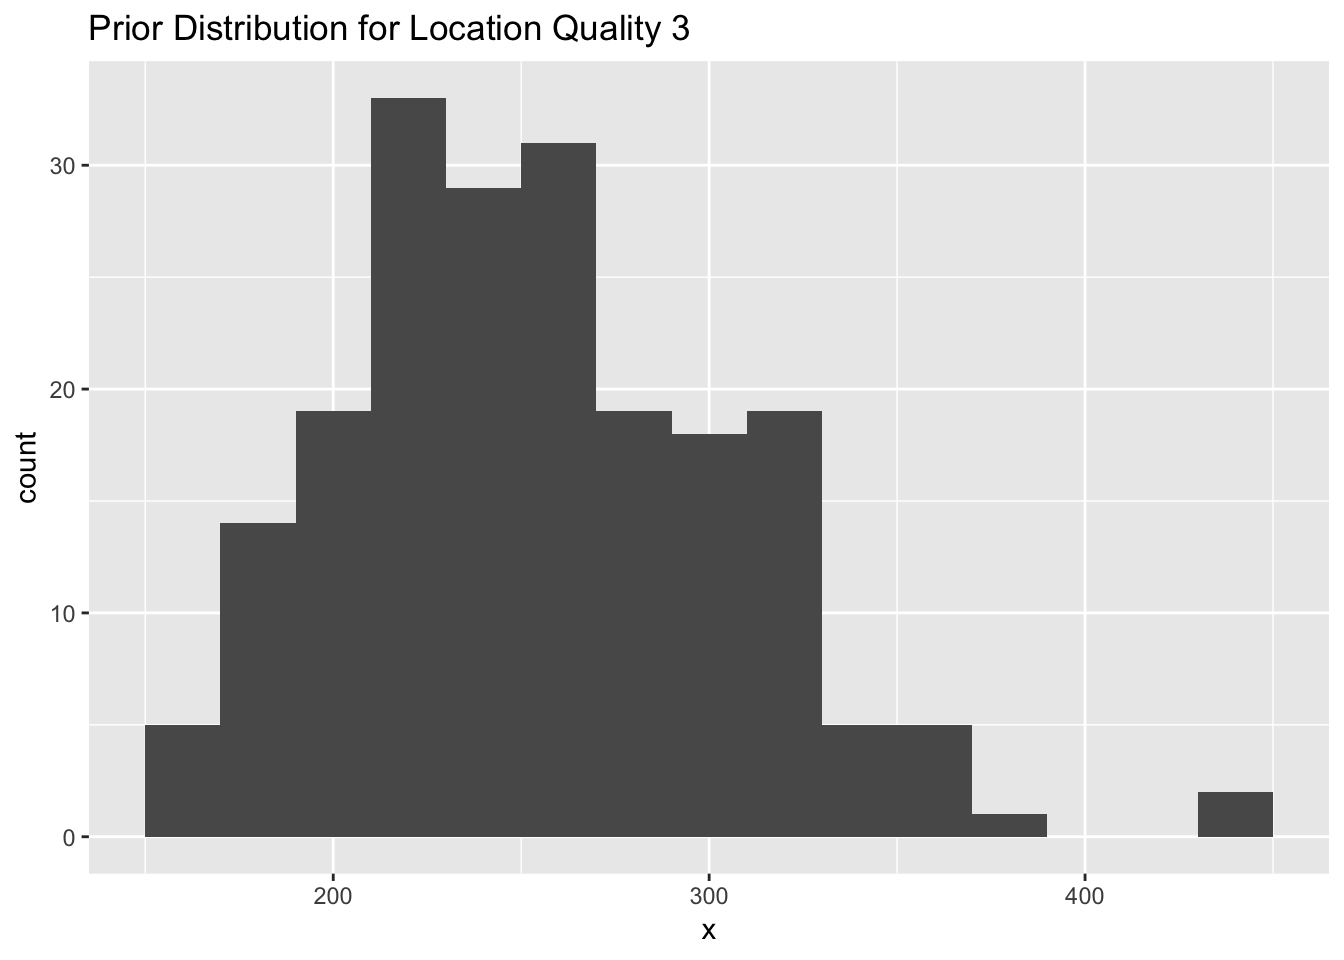 A histogram representing a prior distribution (normal) for location quality class 3 with a mean of log(250) and standard error of 0.2.